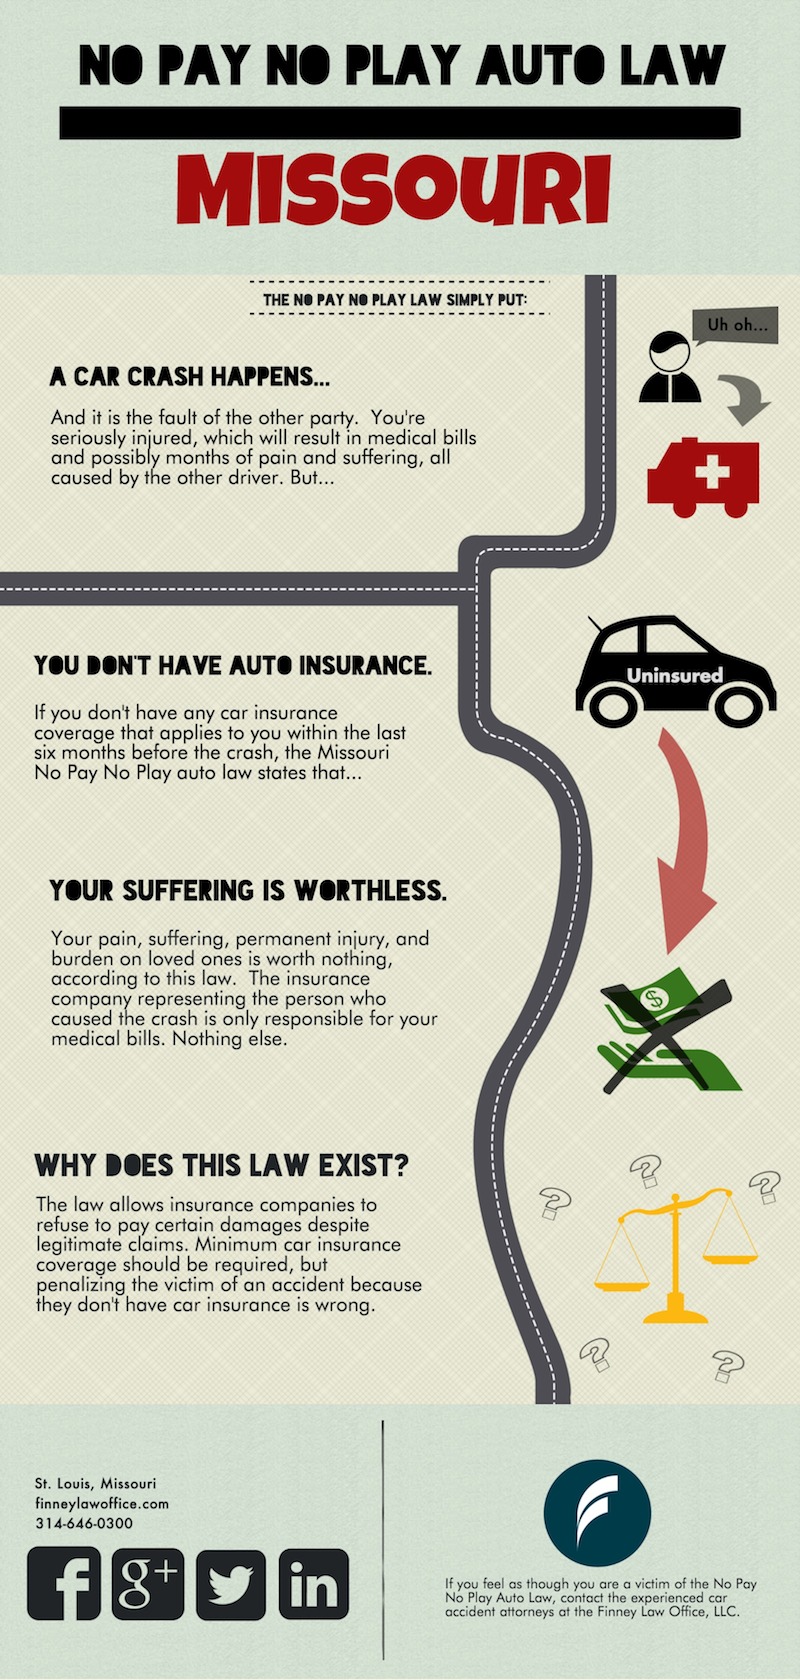 No Pay No Play Auto Law | St. Louis, MO Car Accident Injury Attorney | Finney Law Office, LLC